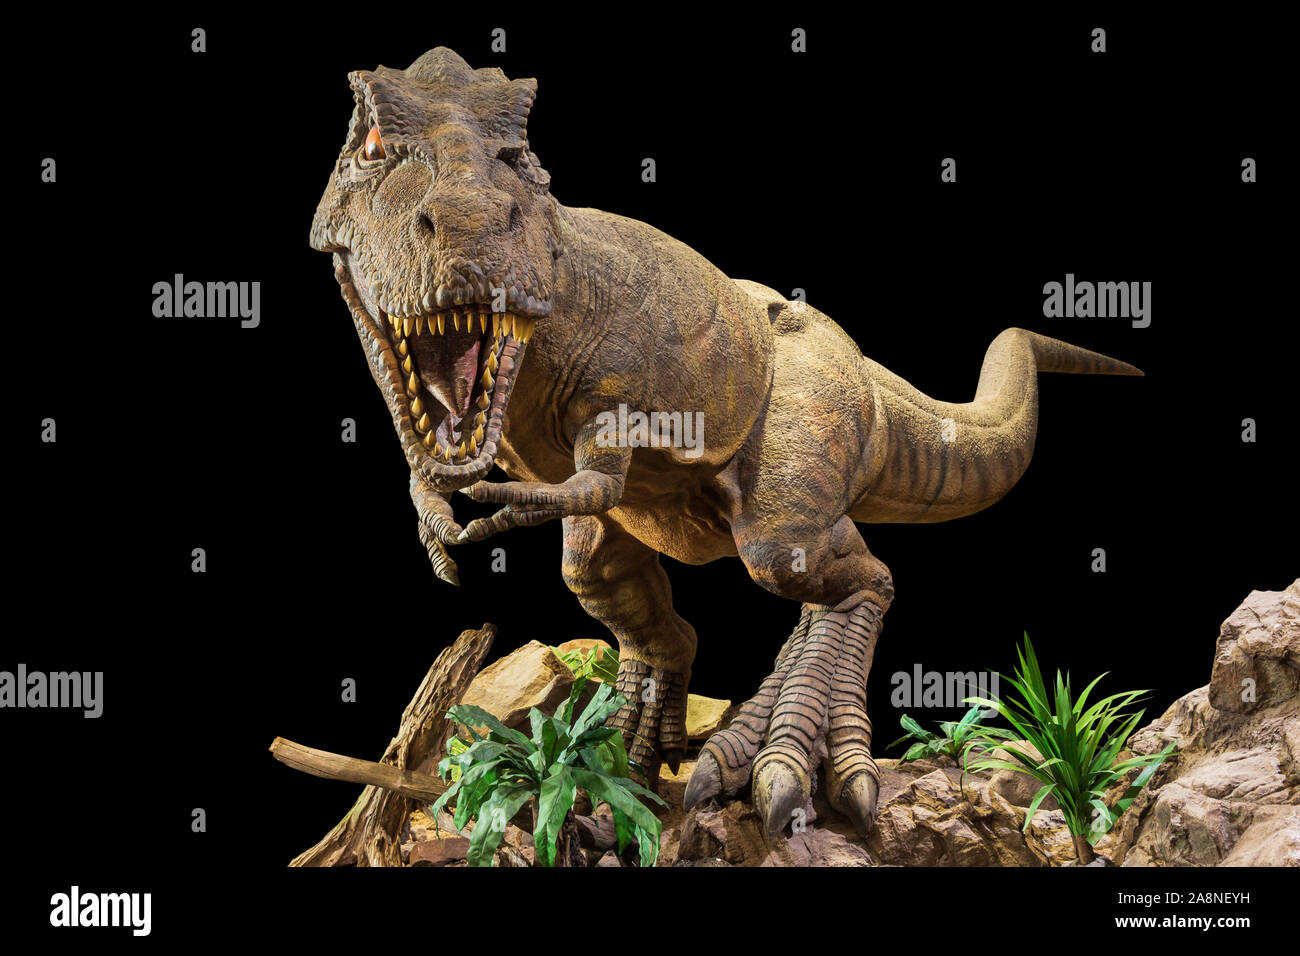 Tyrannosaurus rex . T-rex is walking , growling and open mouth on rock . Black isolated background . Embedded clipping paths . Stock Photo